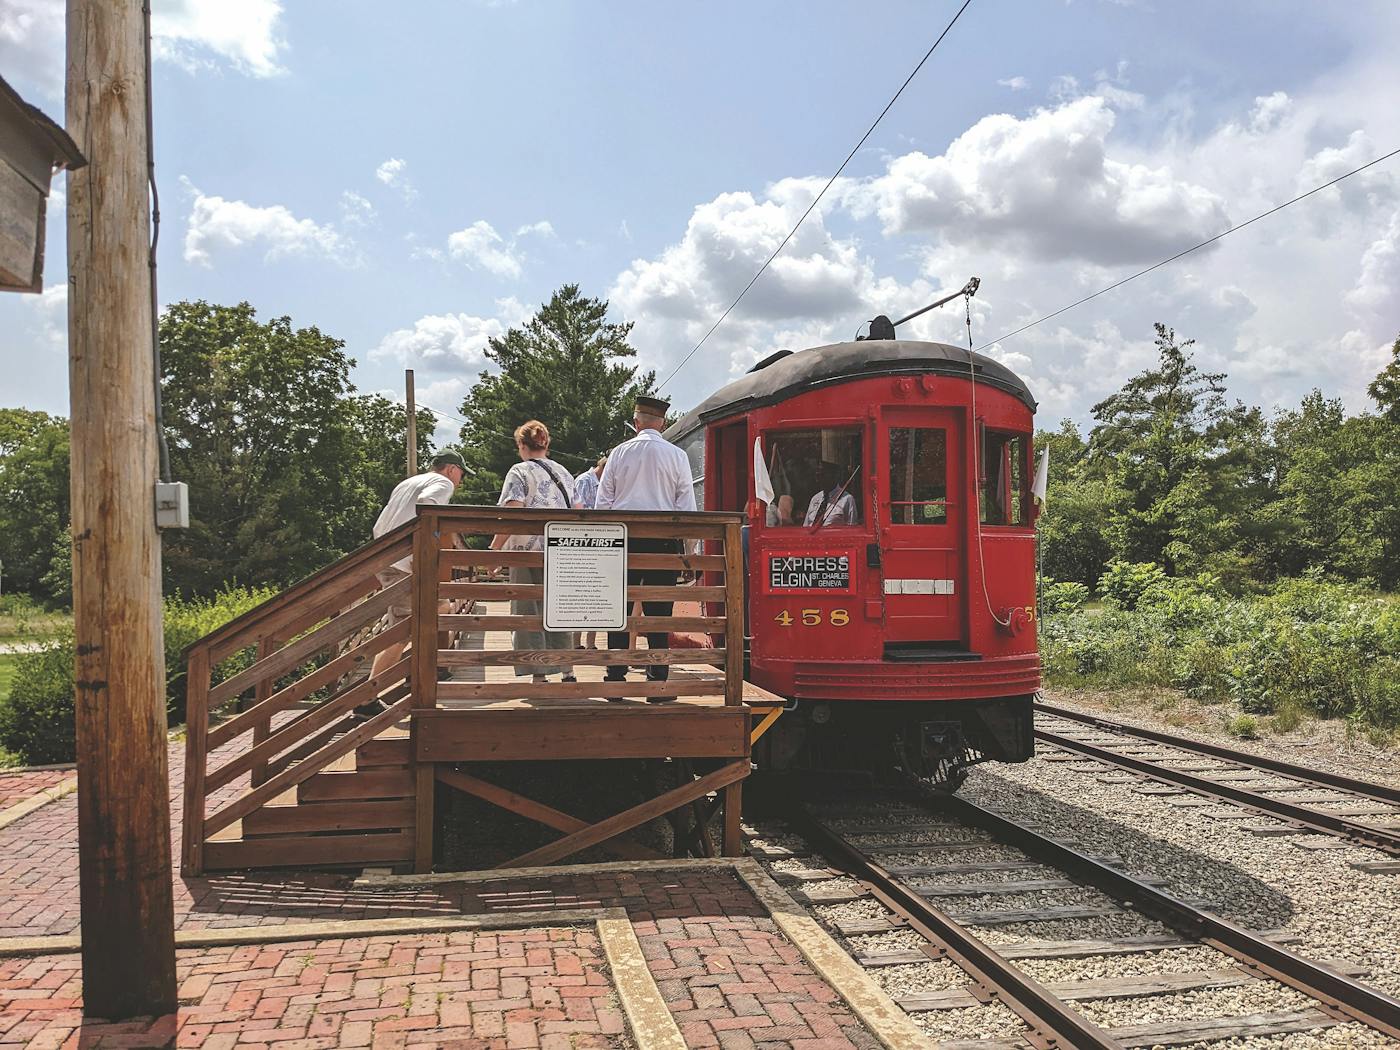 People standing on train platform next to red trolley car at Fox River Trolley Museum in South Elgin, Illinois (photo courtesy of Fox River Trolley Museum))